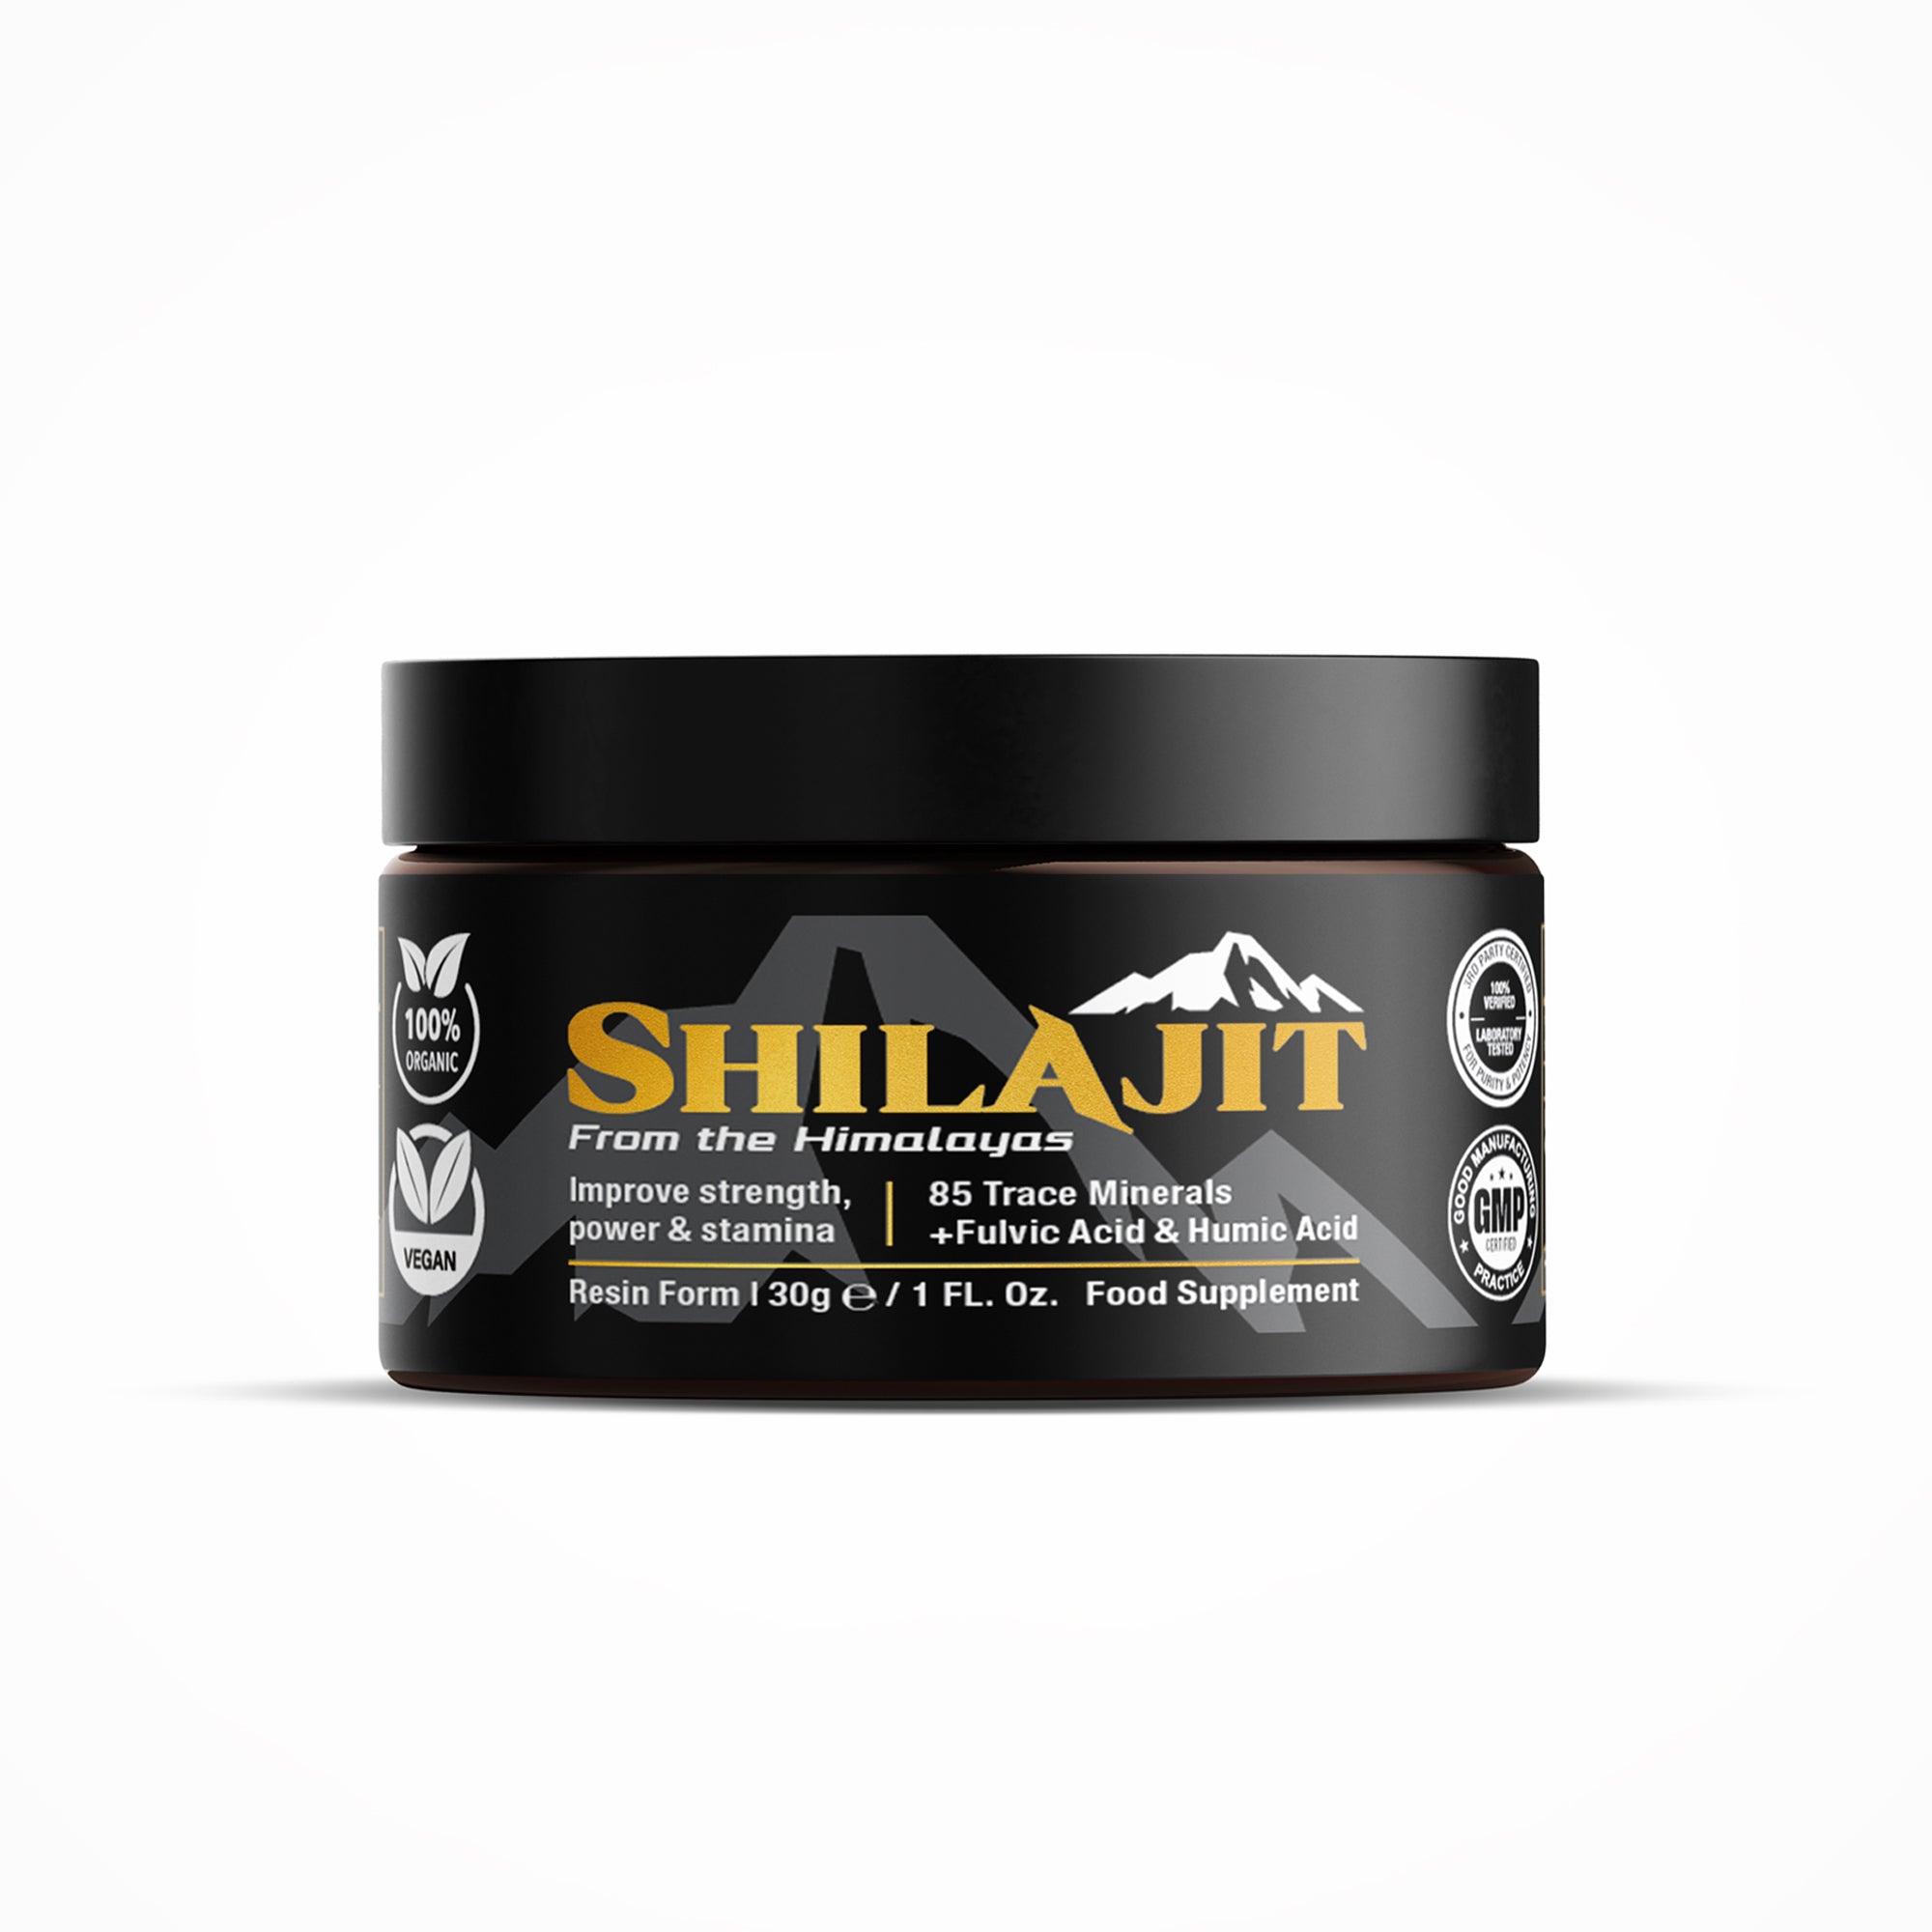 Pure Shilajit From the Himalayas with 85 trace minerals - Improve strength, power & stamina